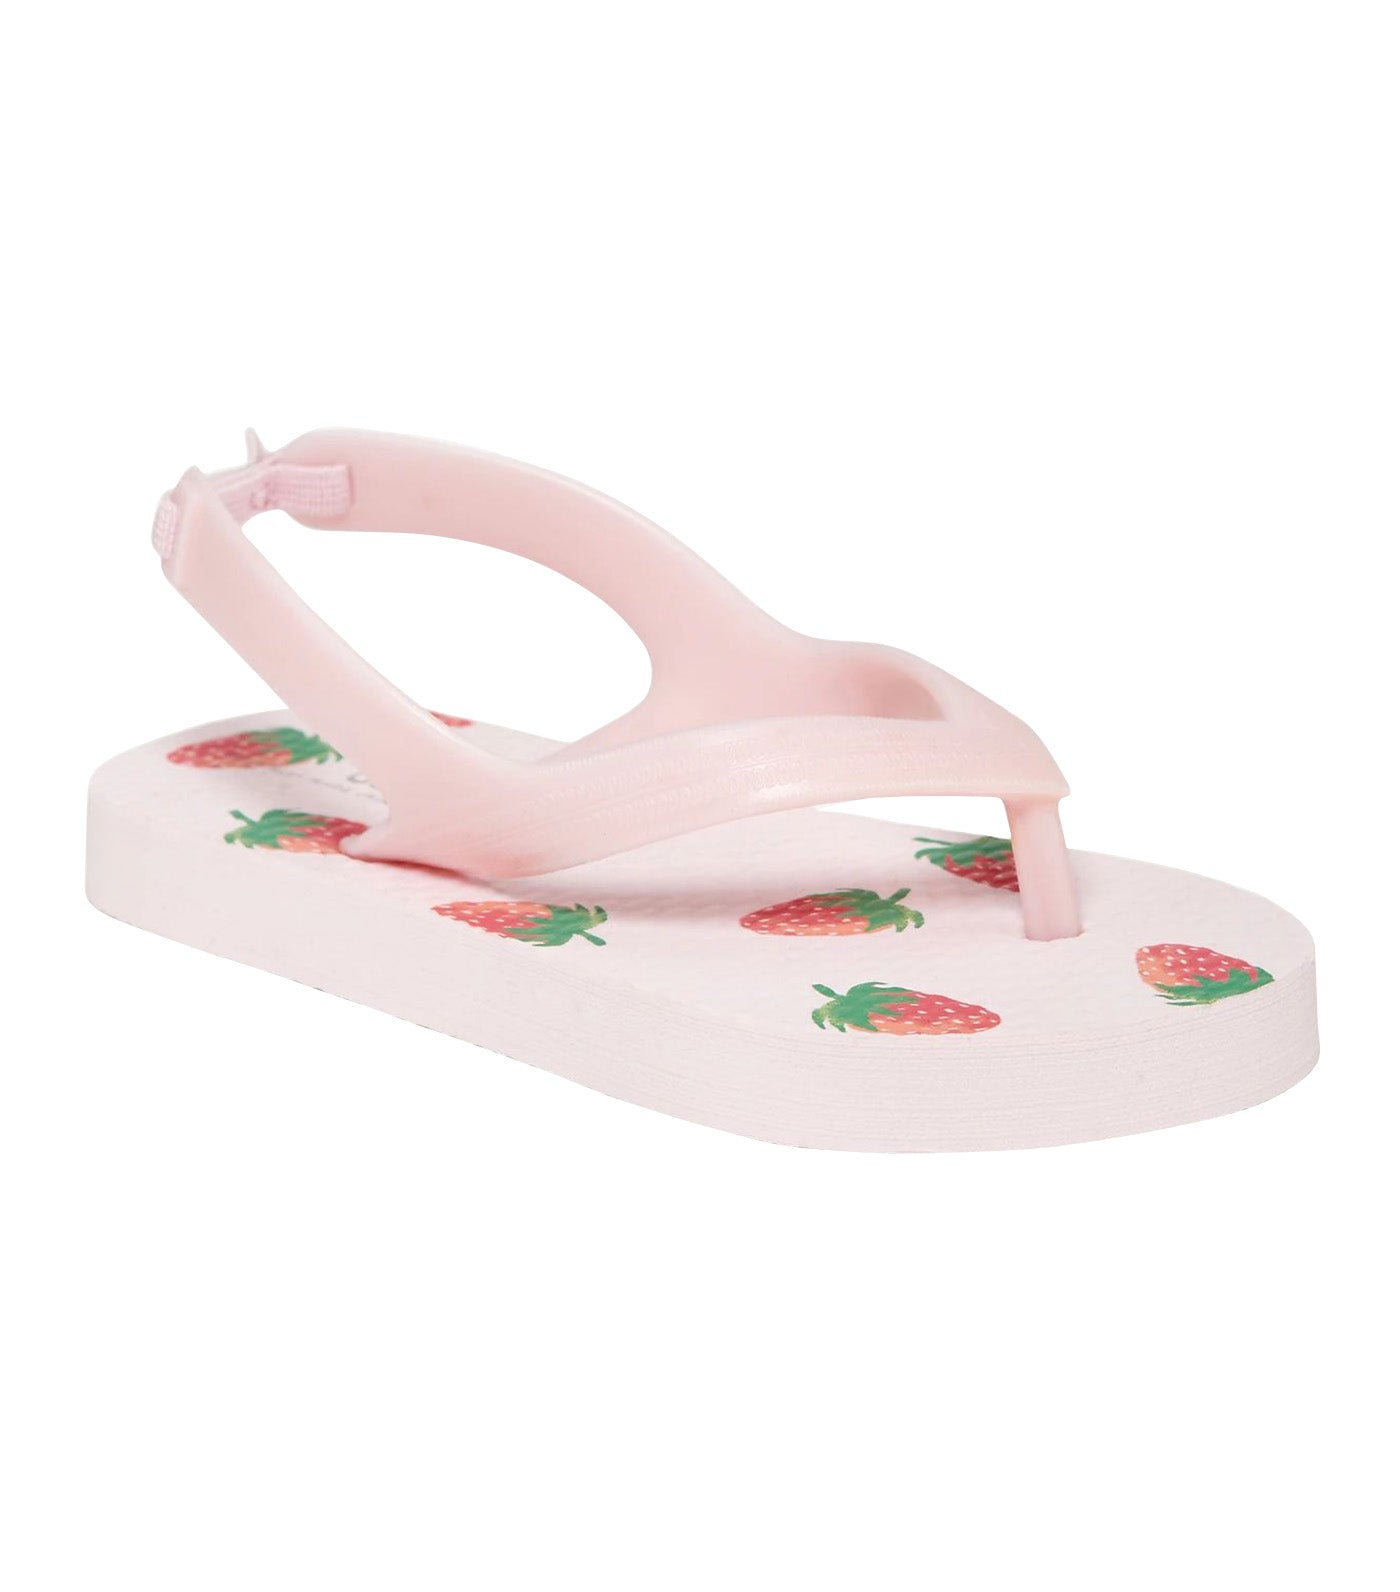 Printed Flip-Flops for Toddler Girls (Partially Plant-Based) - Strawberry